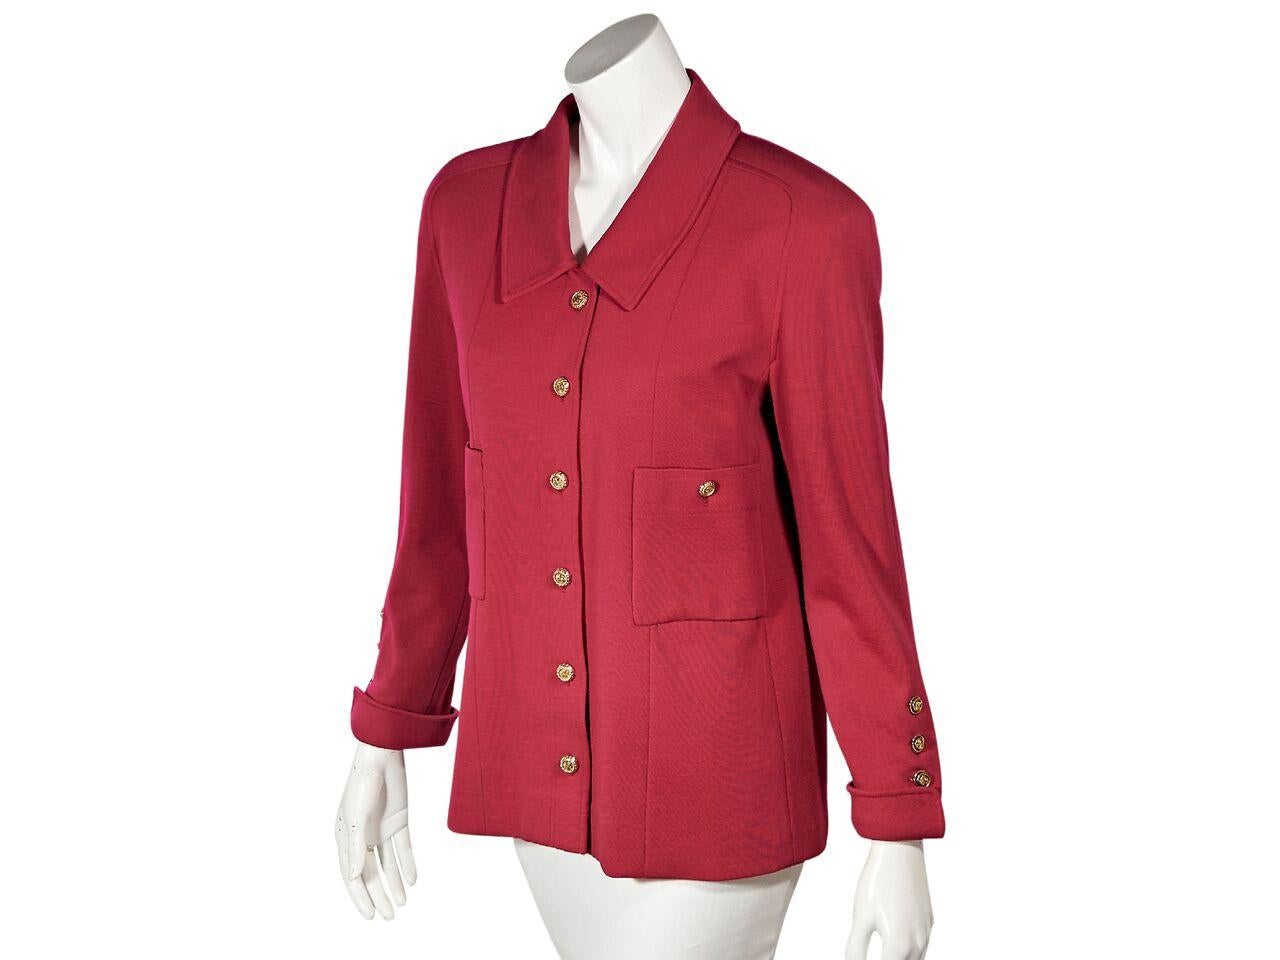 Product details:  Vintage hot pink jacket by Chanel.  Long sleeves.  Three-button detail at cuffs.  Button-front closure.  Button patch front pockets.  Goldtone hardware.  Bust 39.5